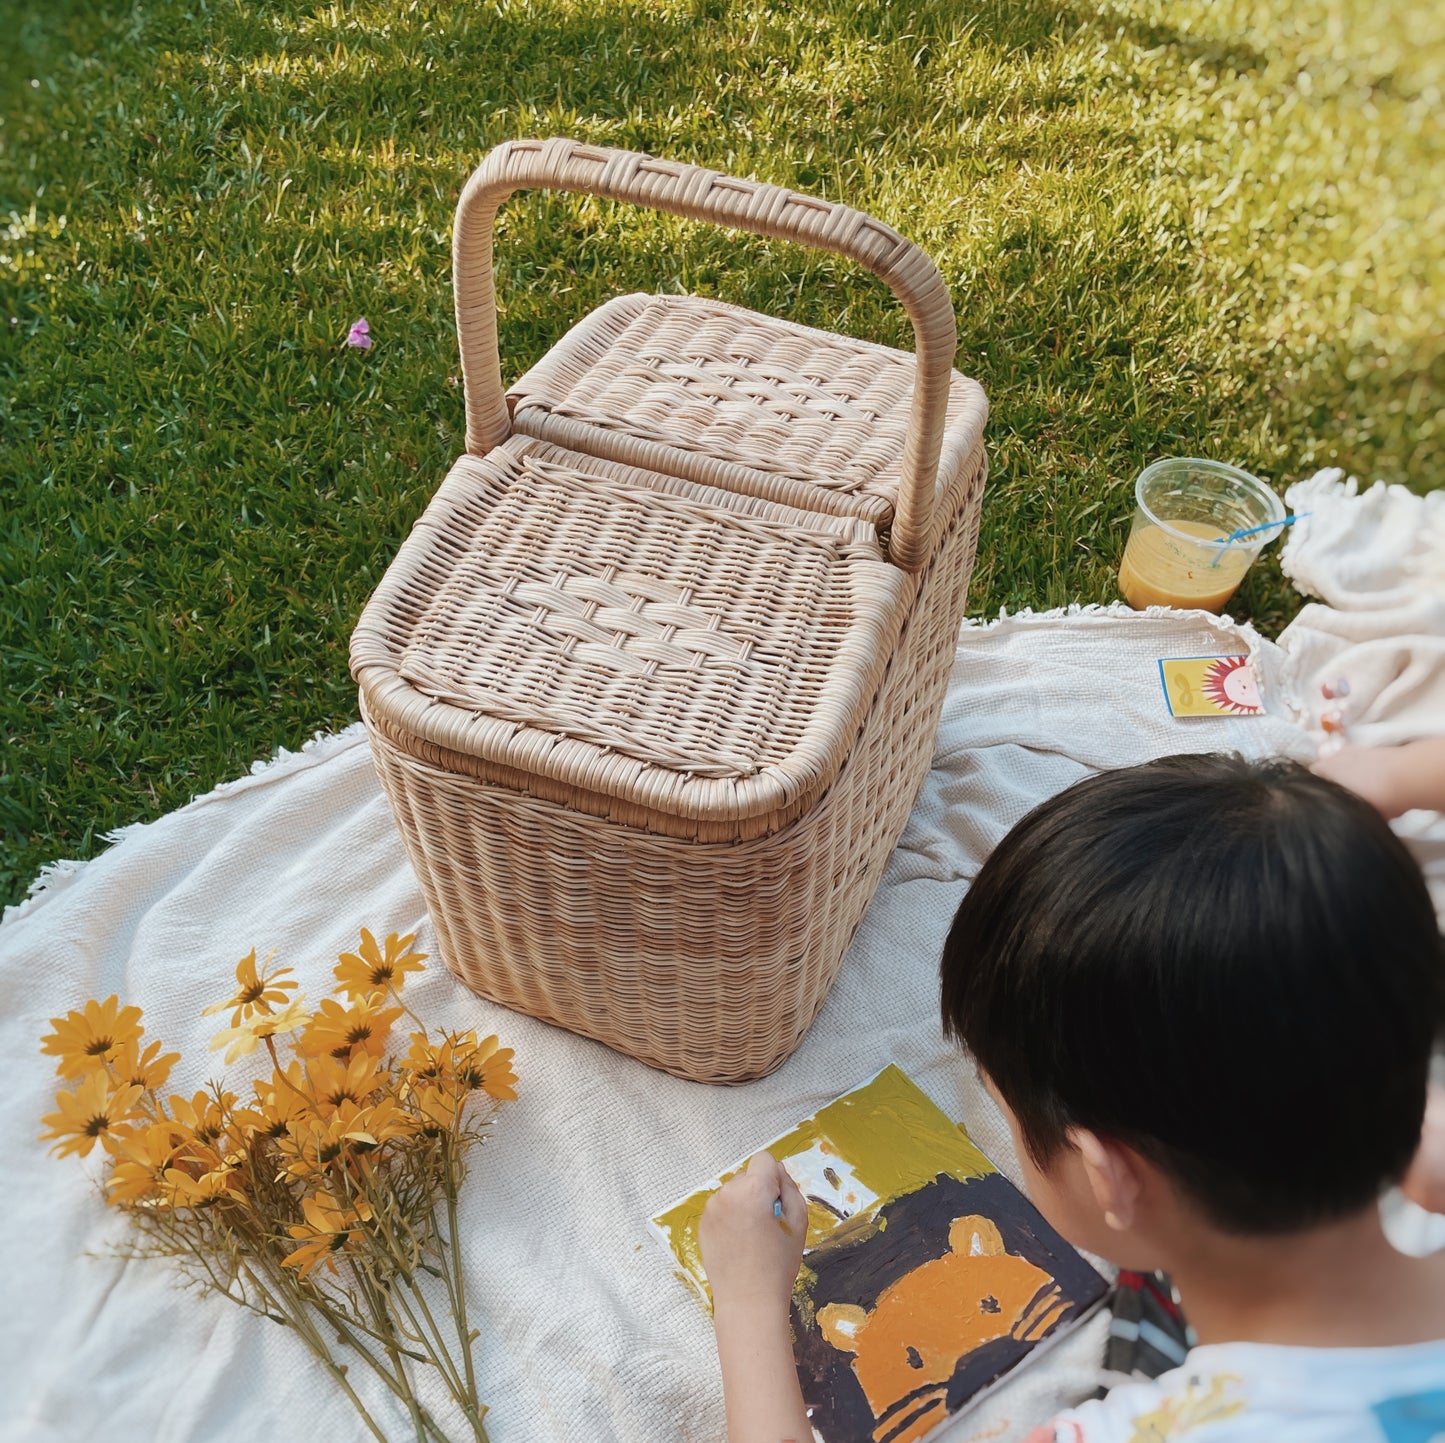 Packing for a Picnic and Painting playdate this June Holiday!